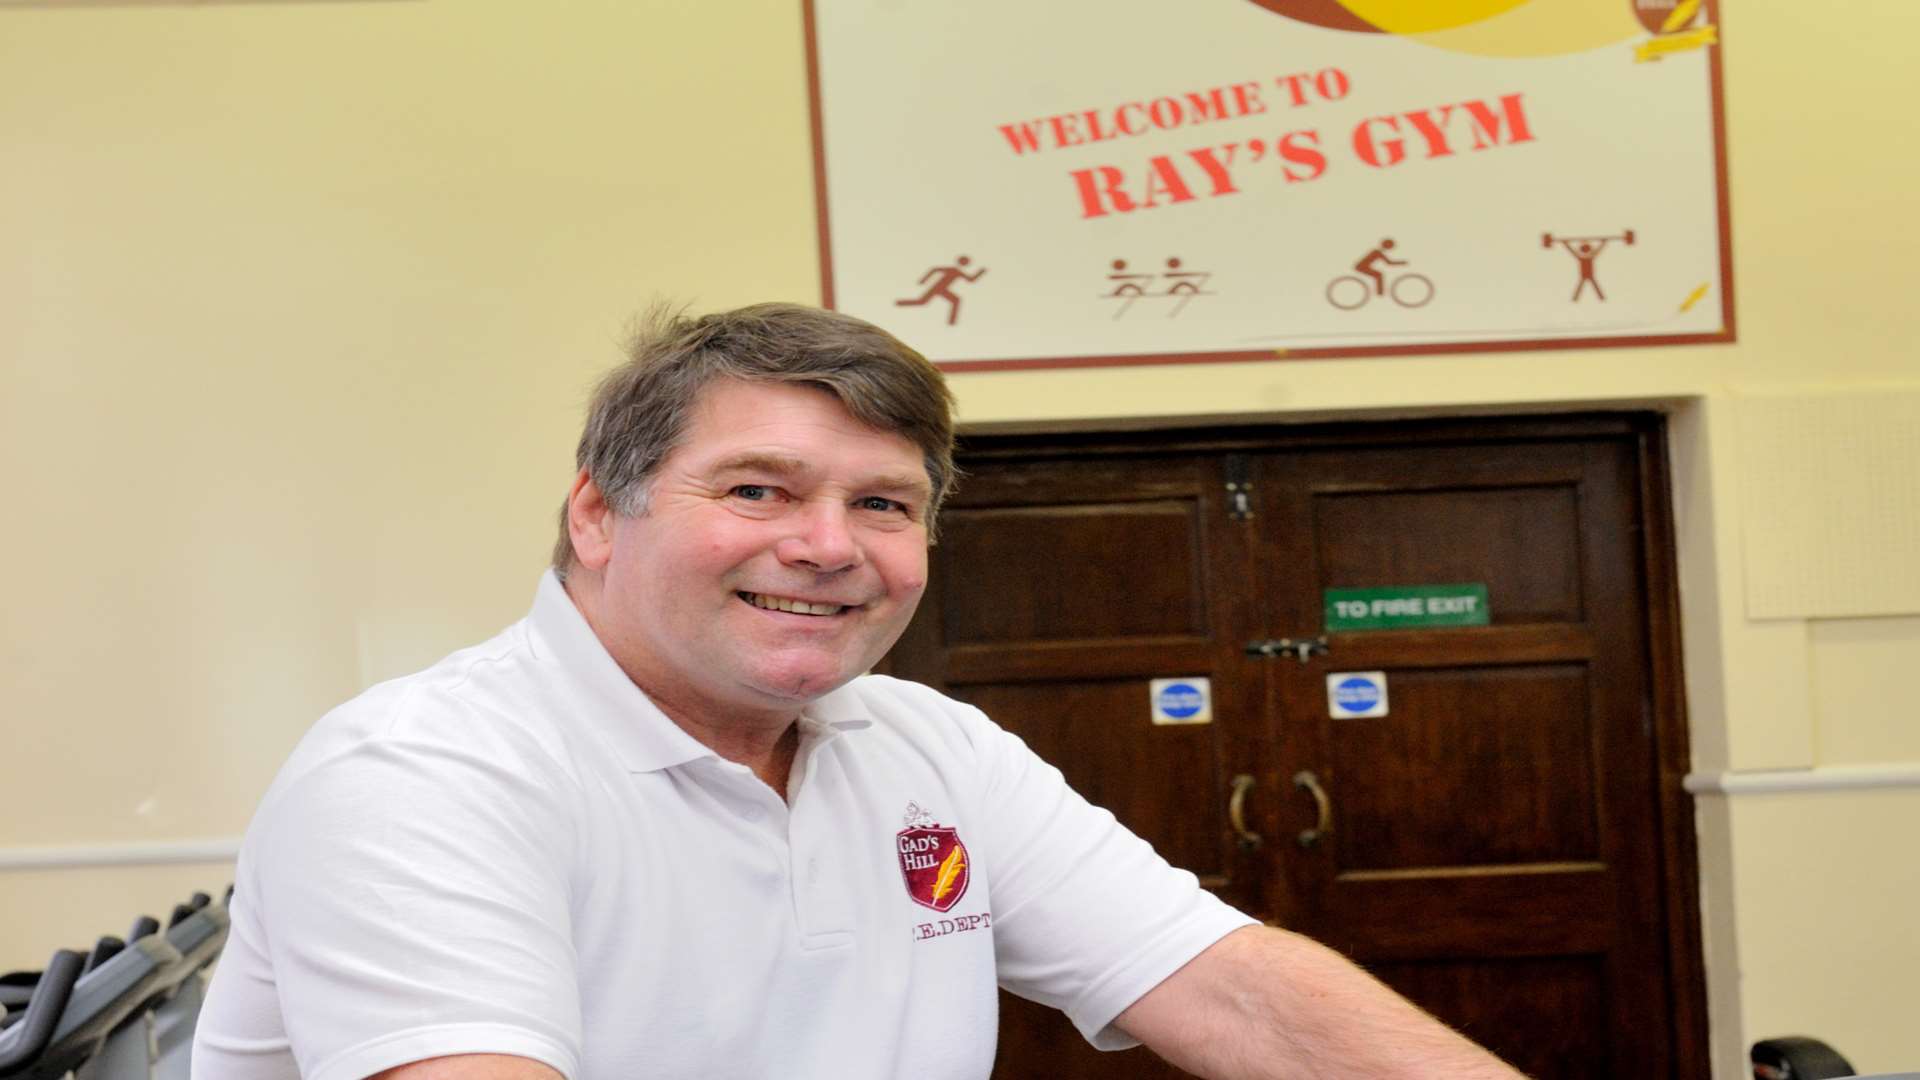 A fully-equipped gym opens at Gad's Hill Schoolthanks to Ray Jelf